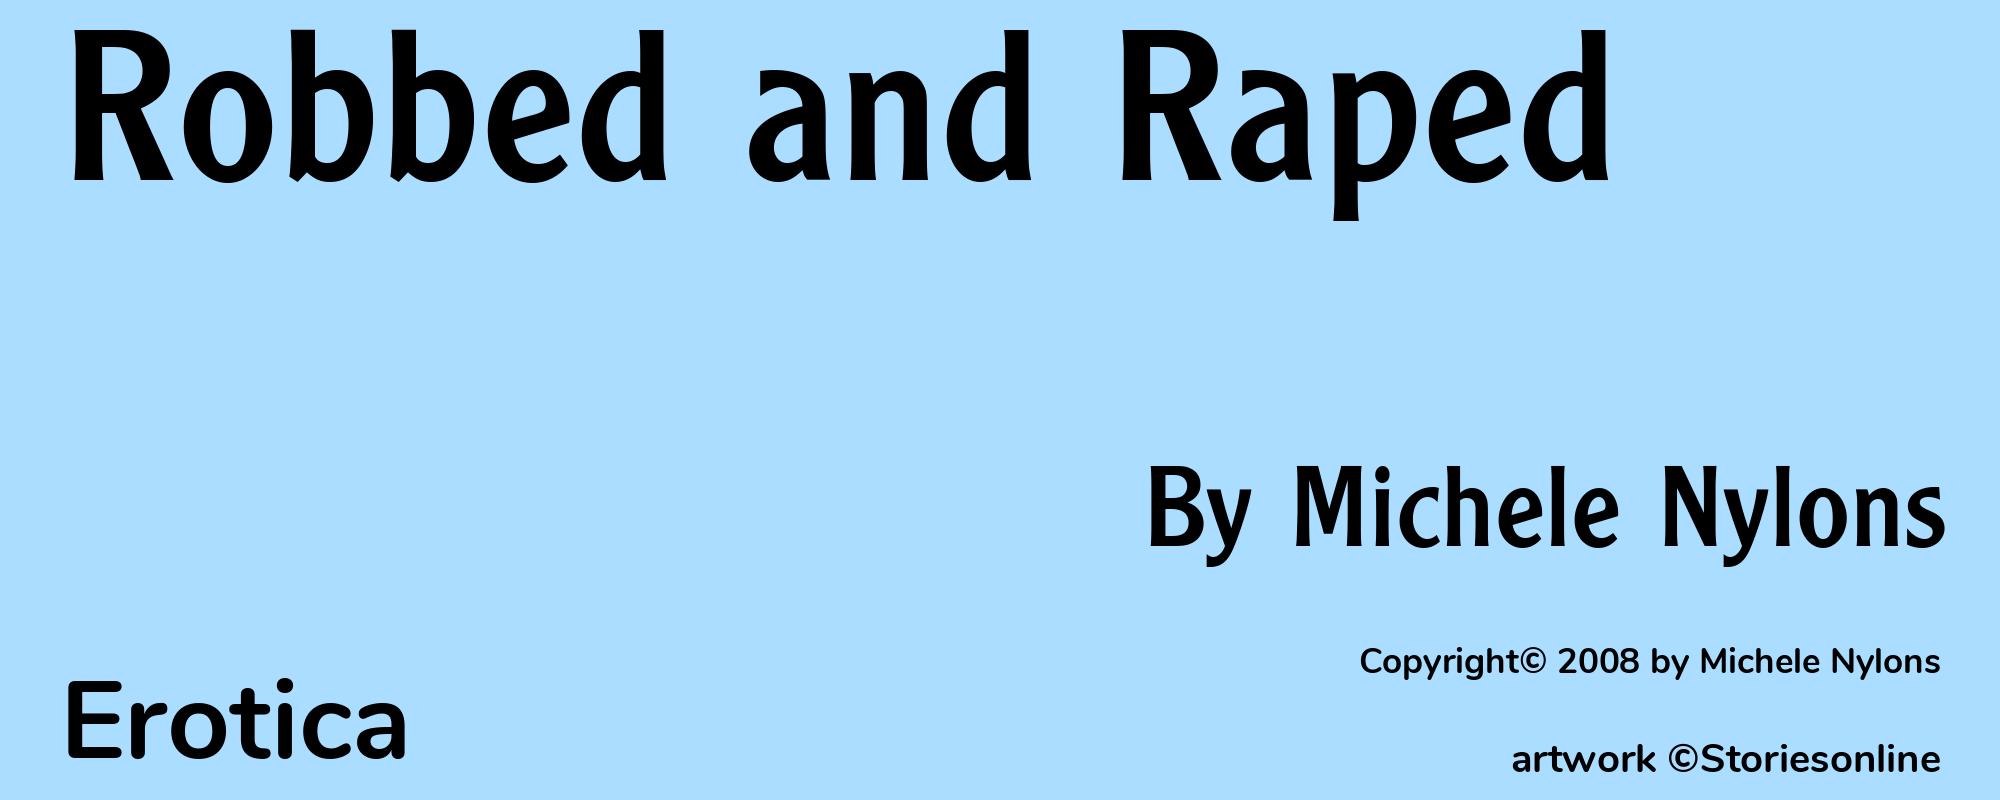 Robbed and Raped - Cover